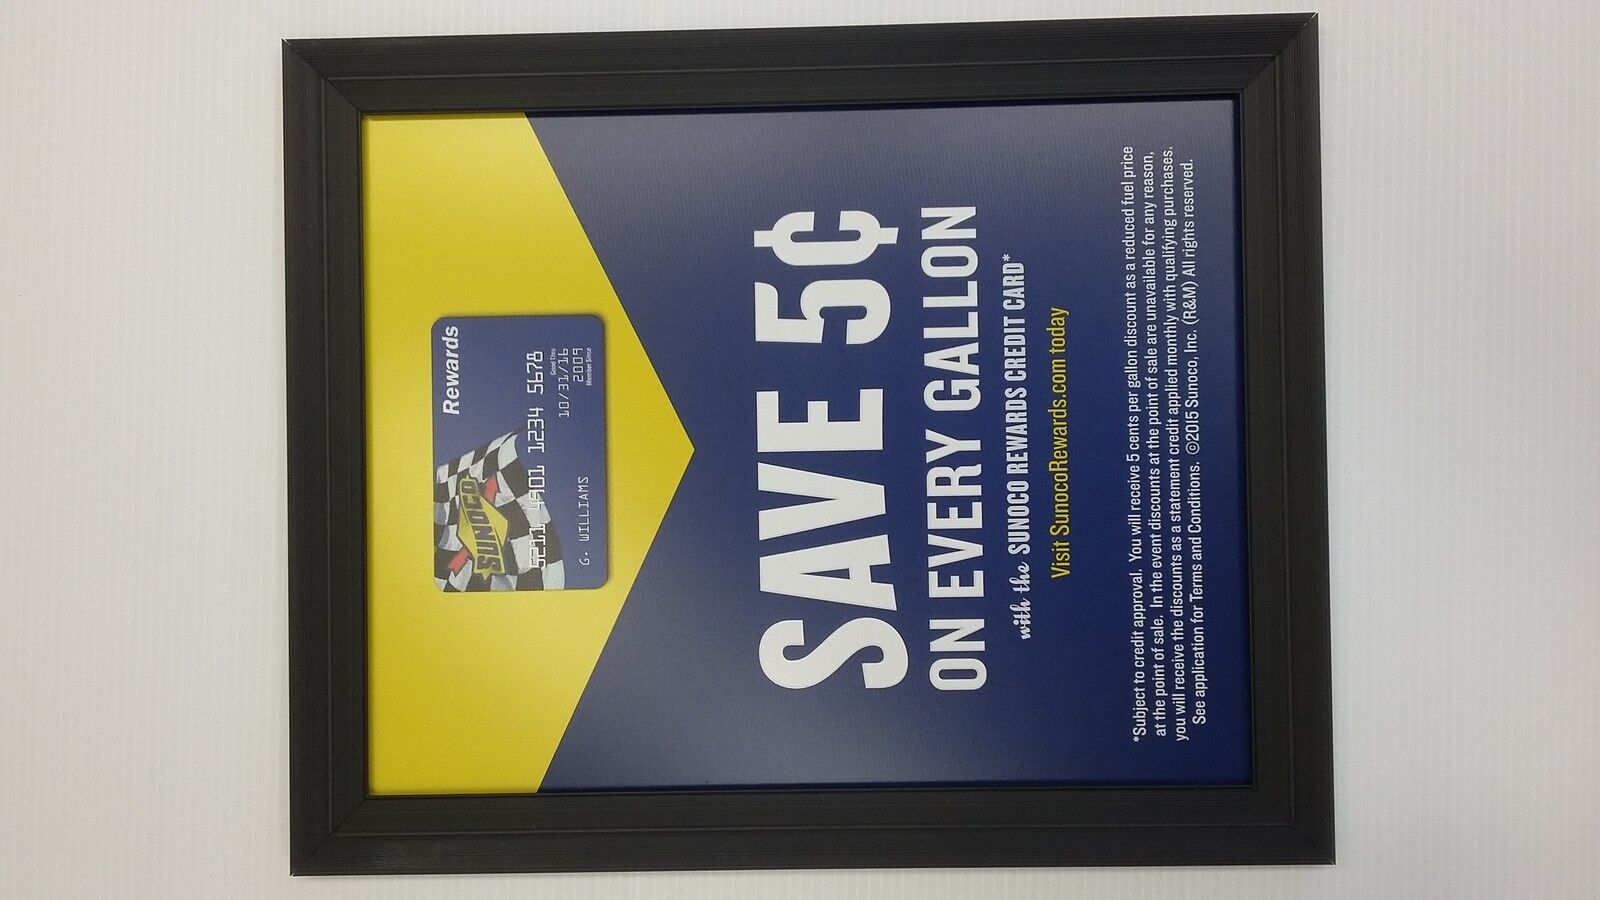 SNAP LOCK FRAME SIGN. WALL MOUNT. FOR GAS PUMP. CONVENIENCE STORE PROMOT